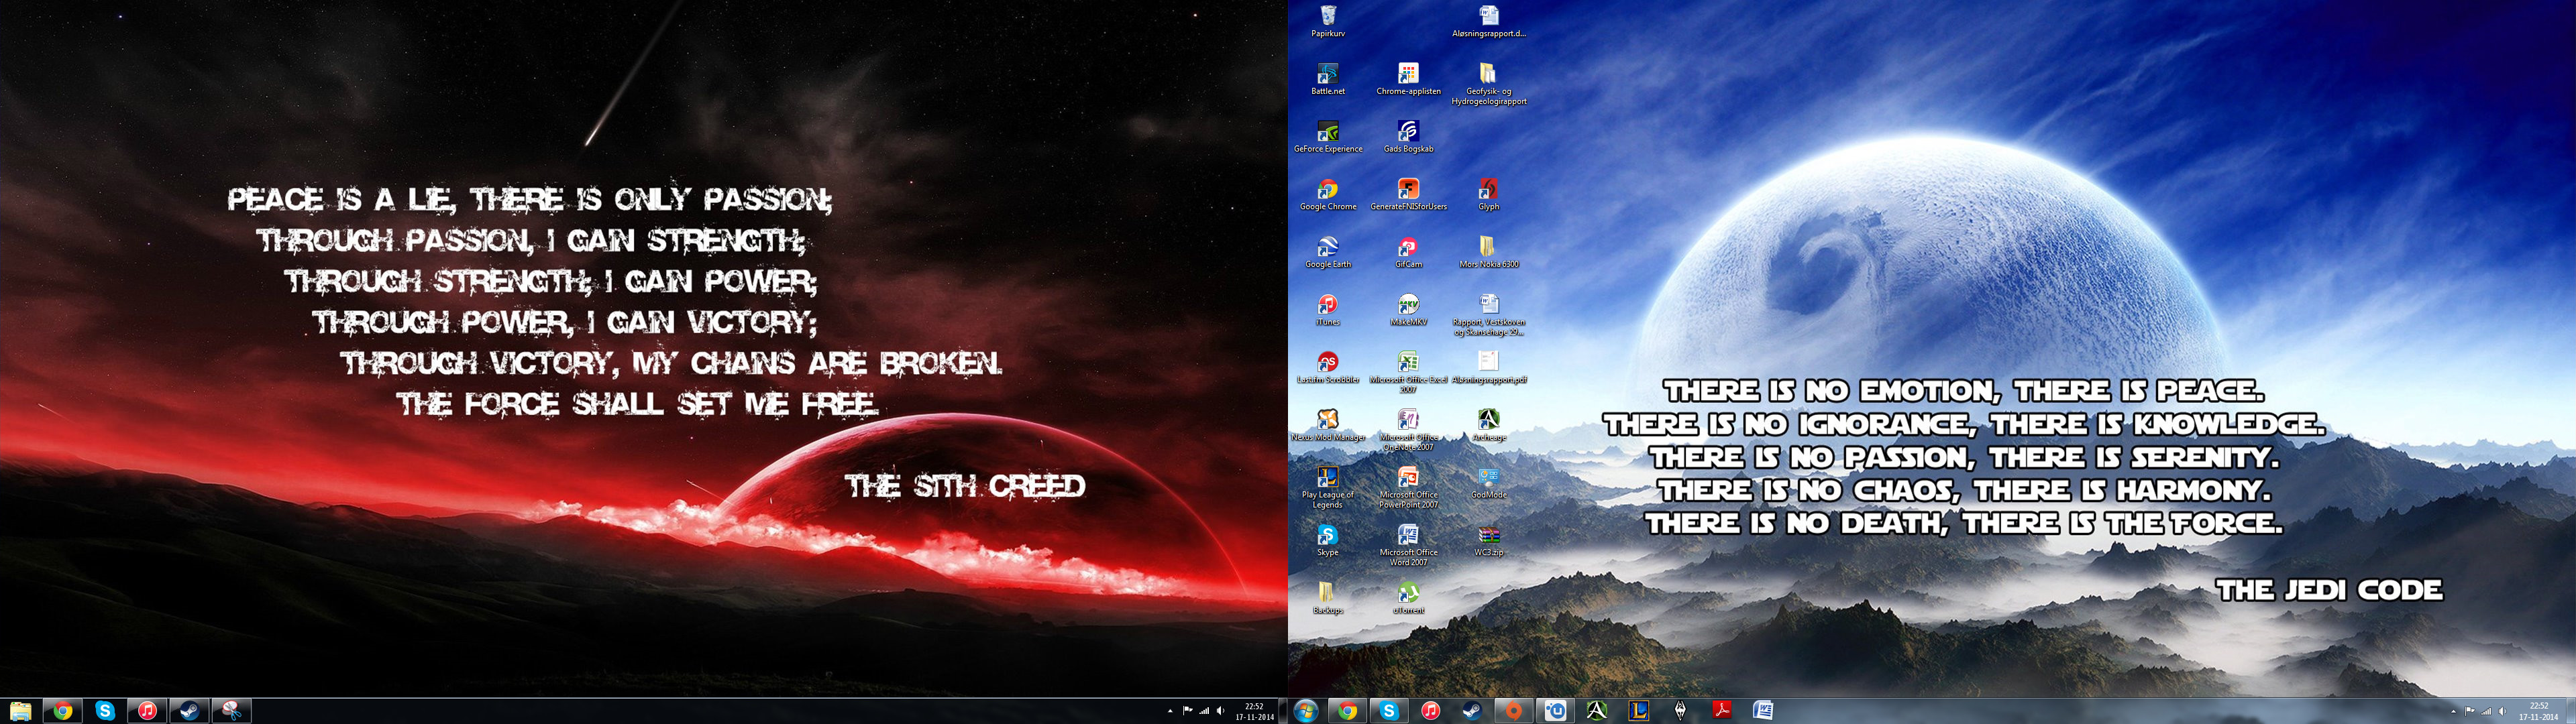 3840x1080 i have two monitors. i think the jedi one is made from an FJer